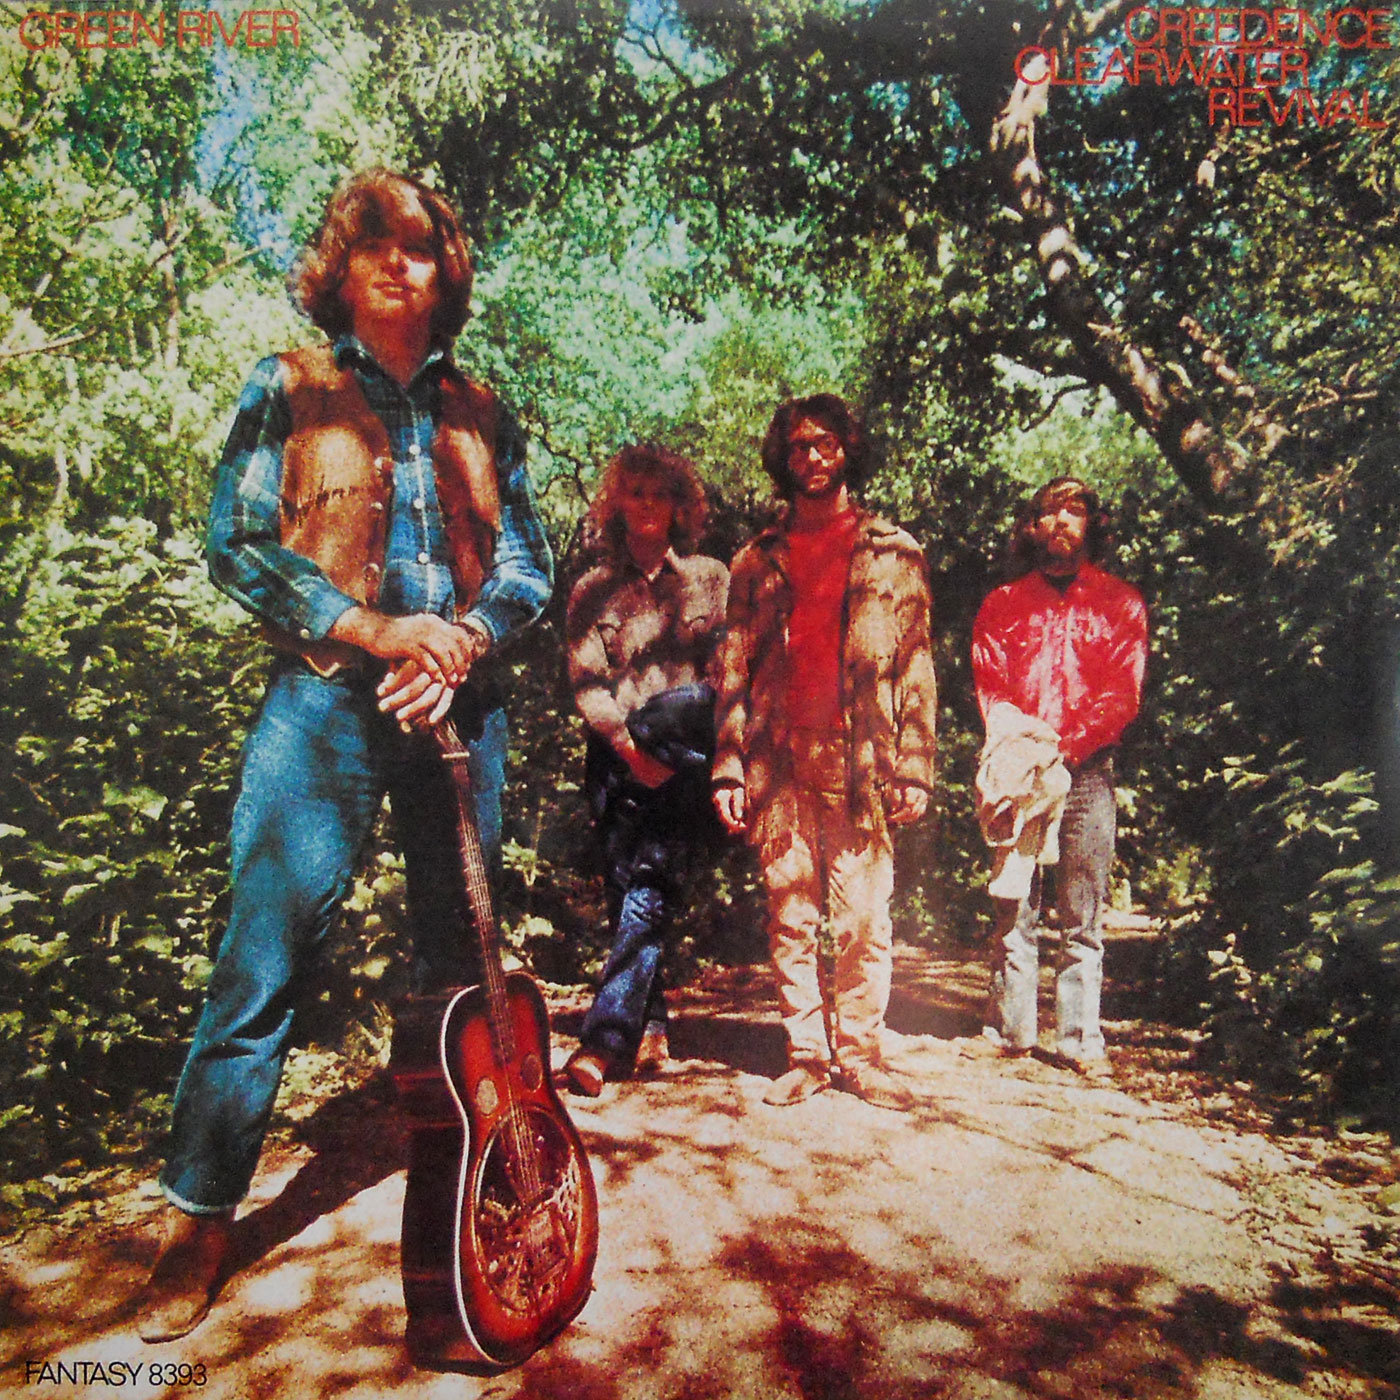 143 Creedence Clearwater Revival – Green River